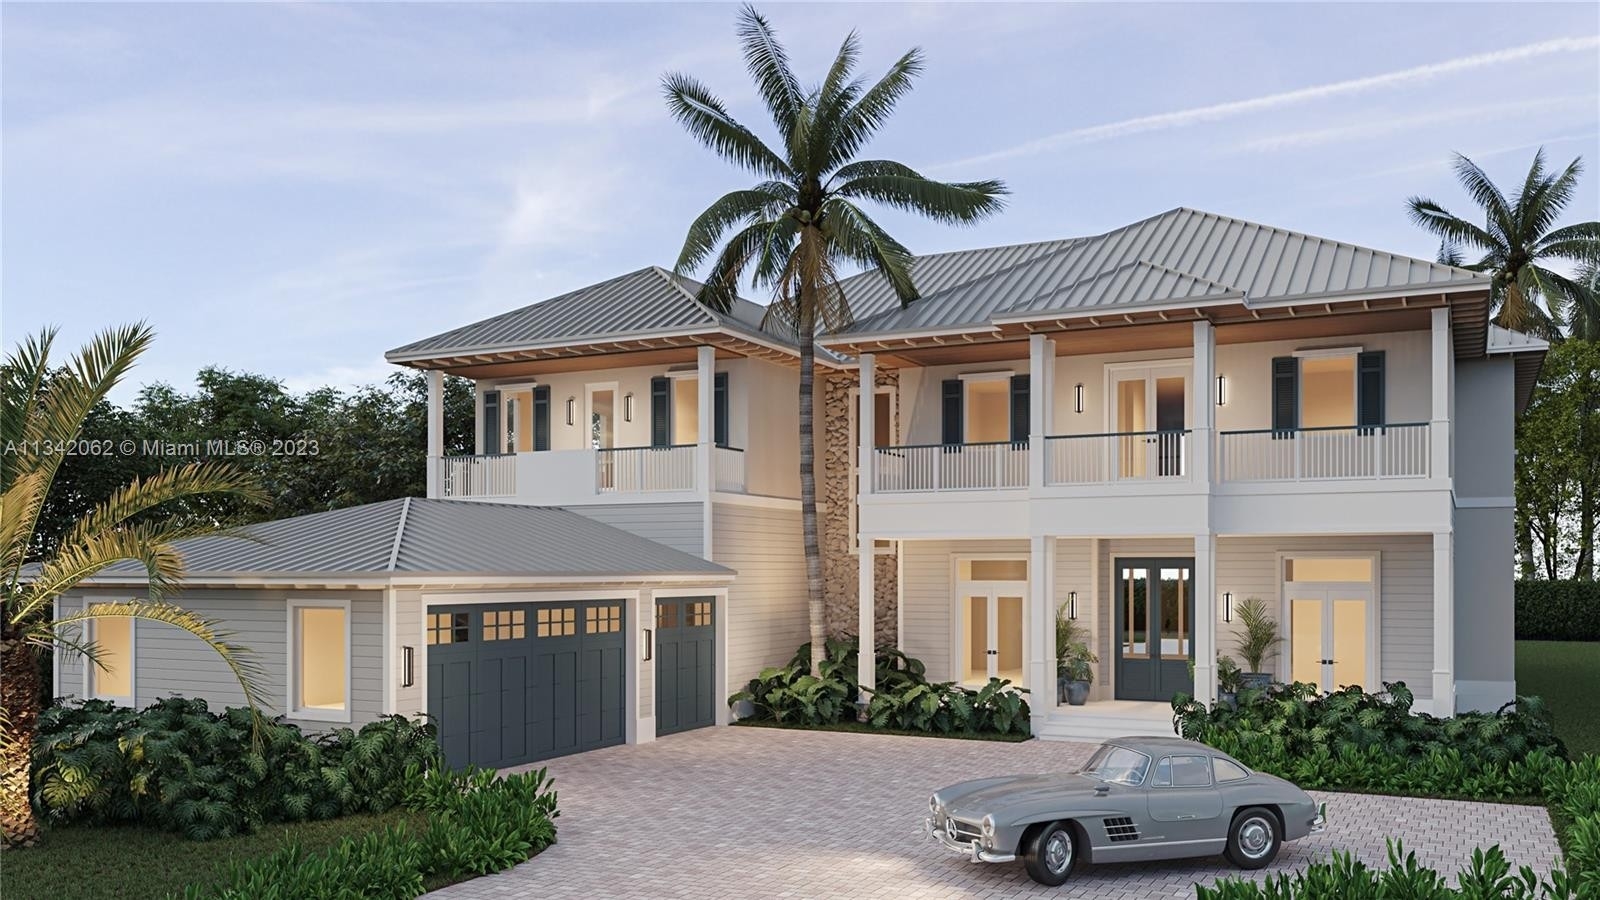 Single Family Home for Sale at College Groves, Miami, FL 33143